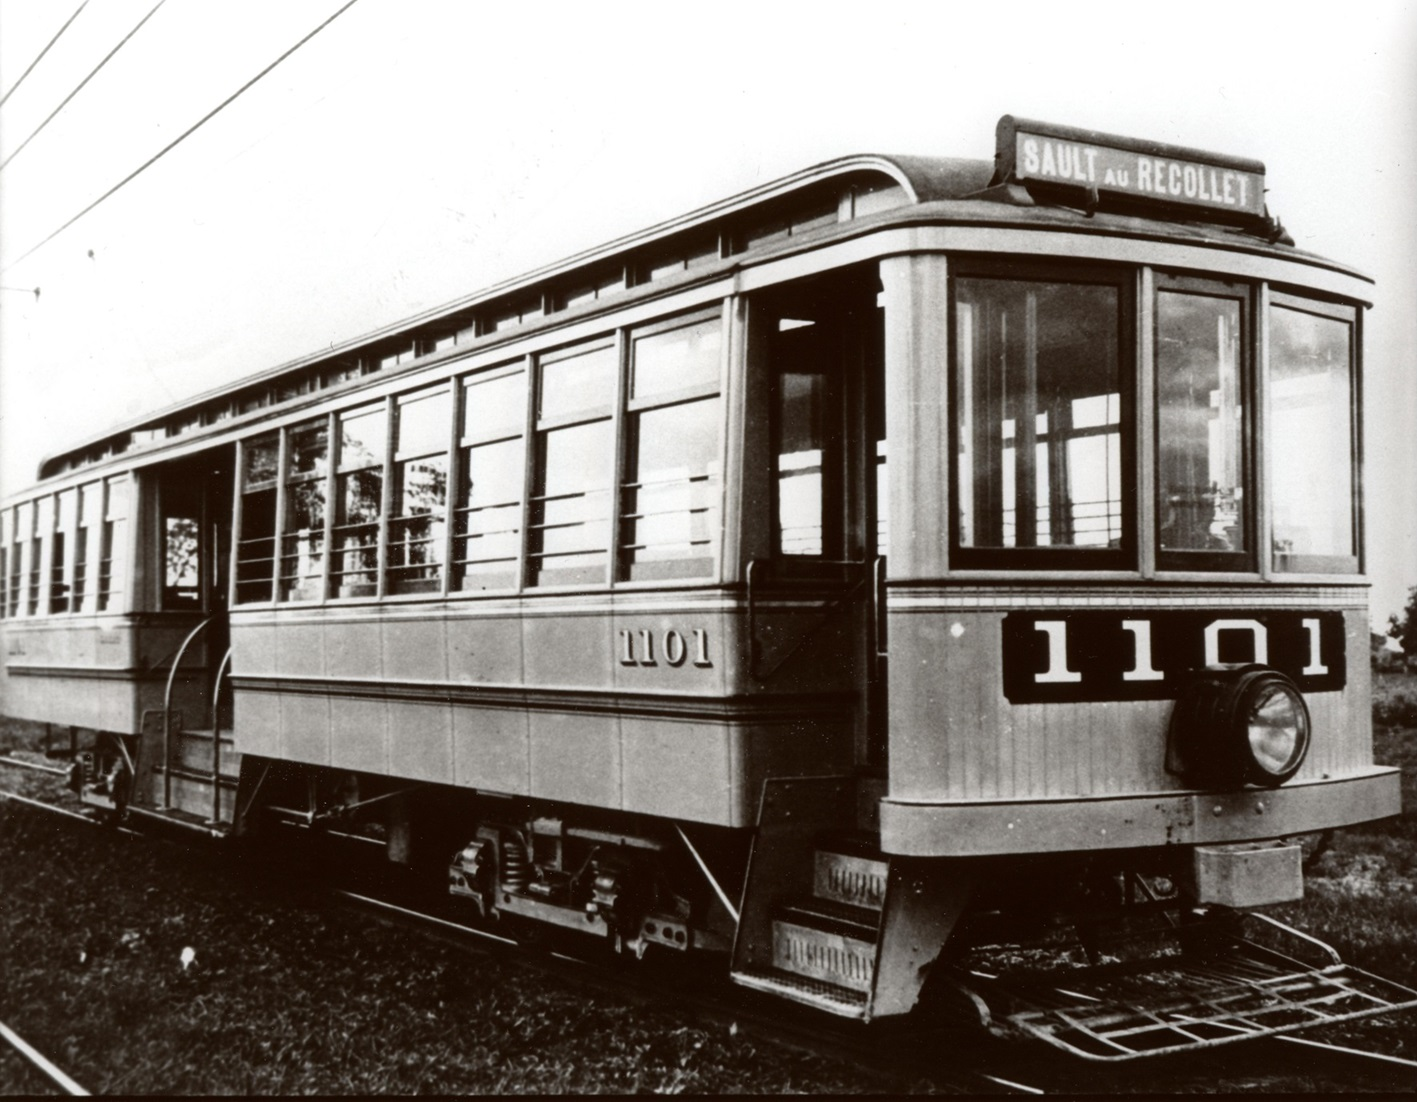 The Villeray tramway, early 20th century: